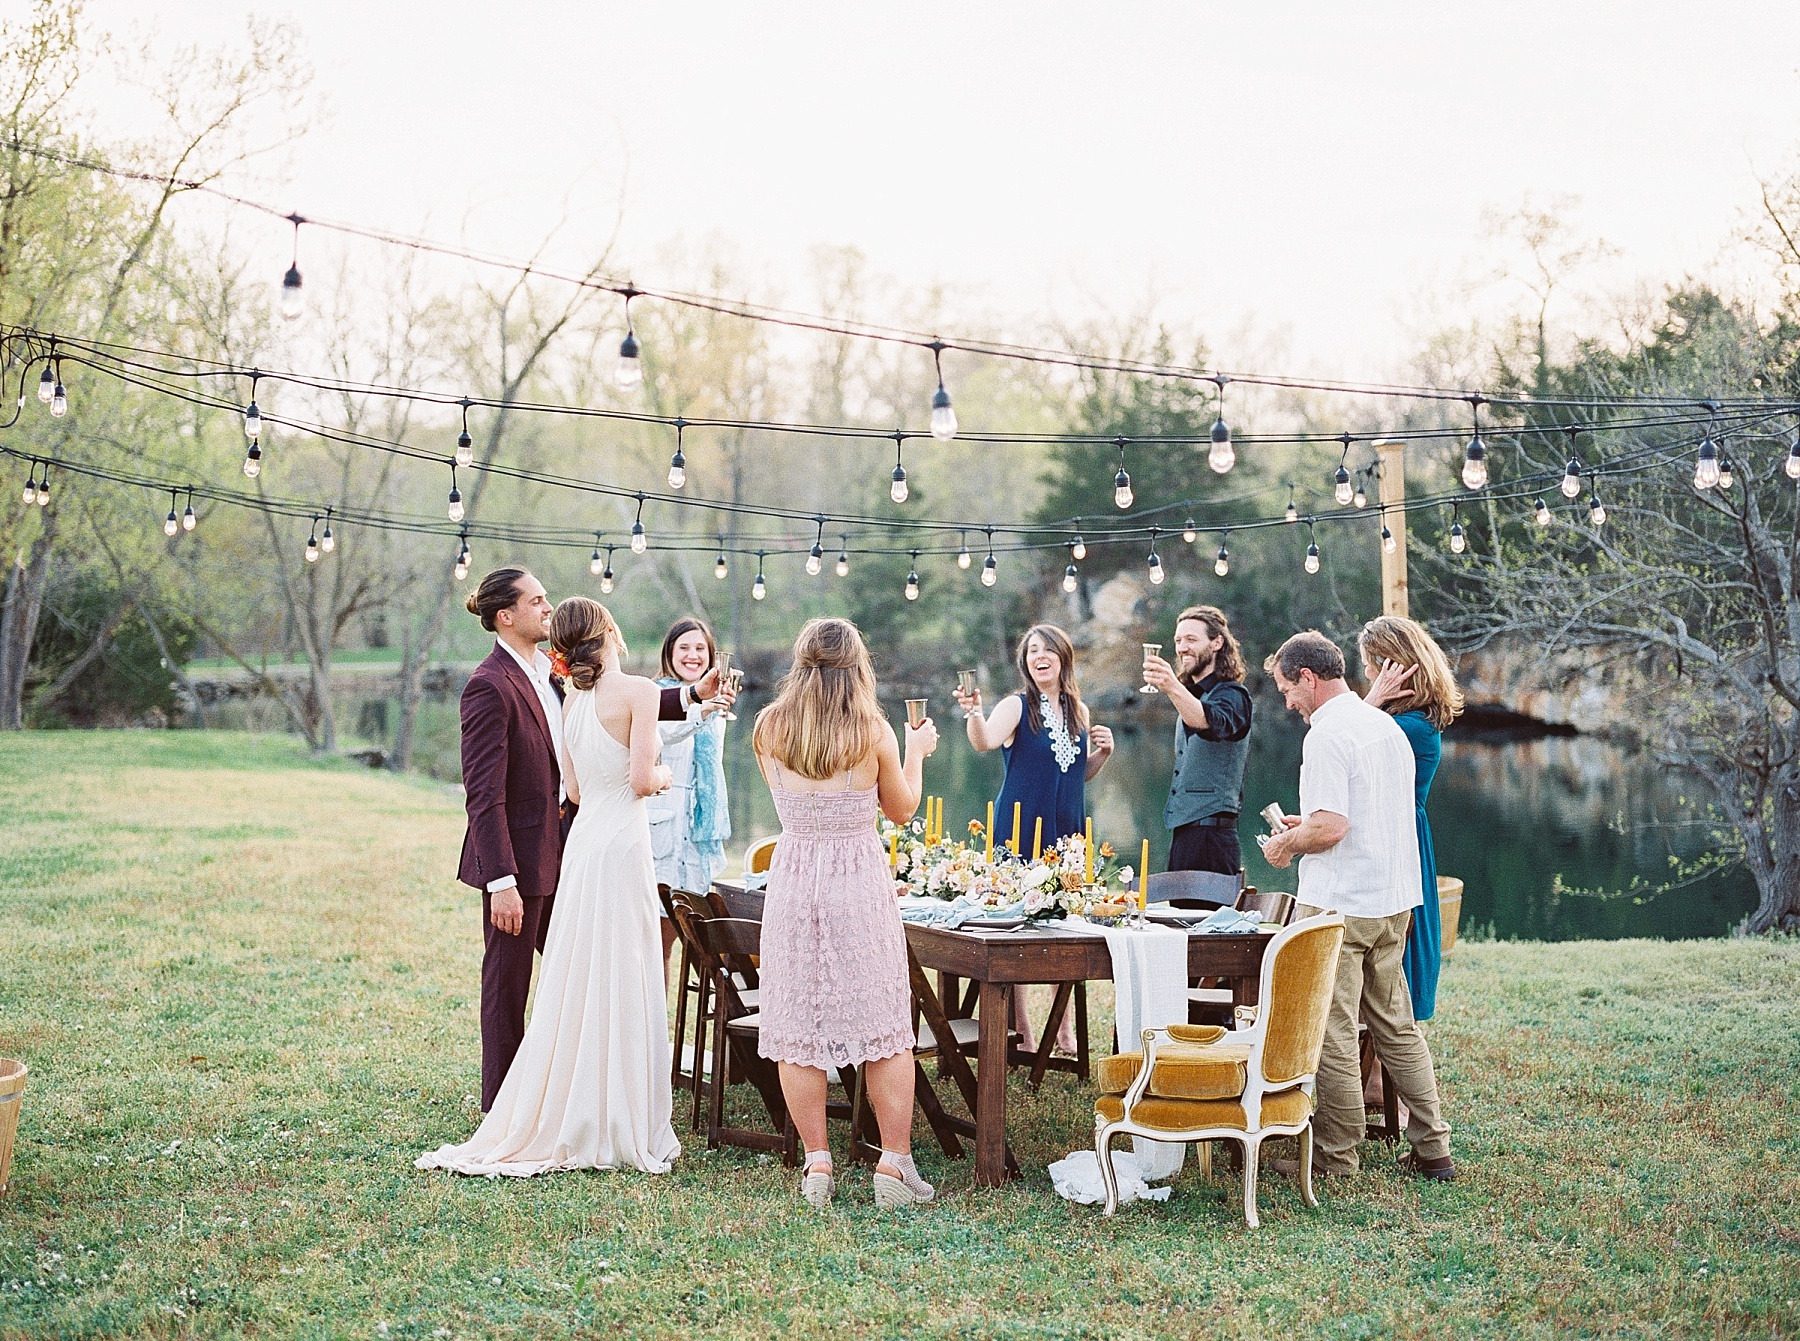 Intimate Spanish and French Inspired Destination Wedding with Lakeside Dinner Party at Dusk at Wildcliff by Kelsi Kliethermes Photography Best Missouri and Maui Wedding Photographer_0013.jpg